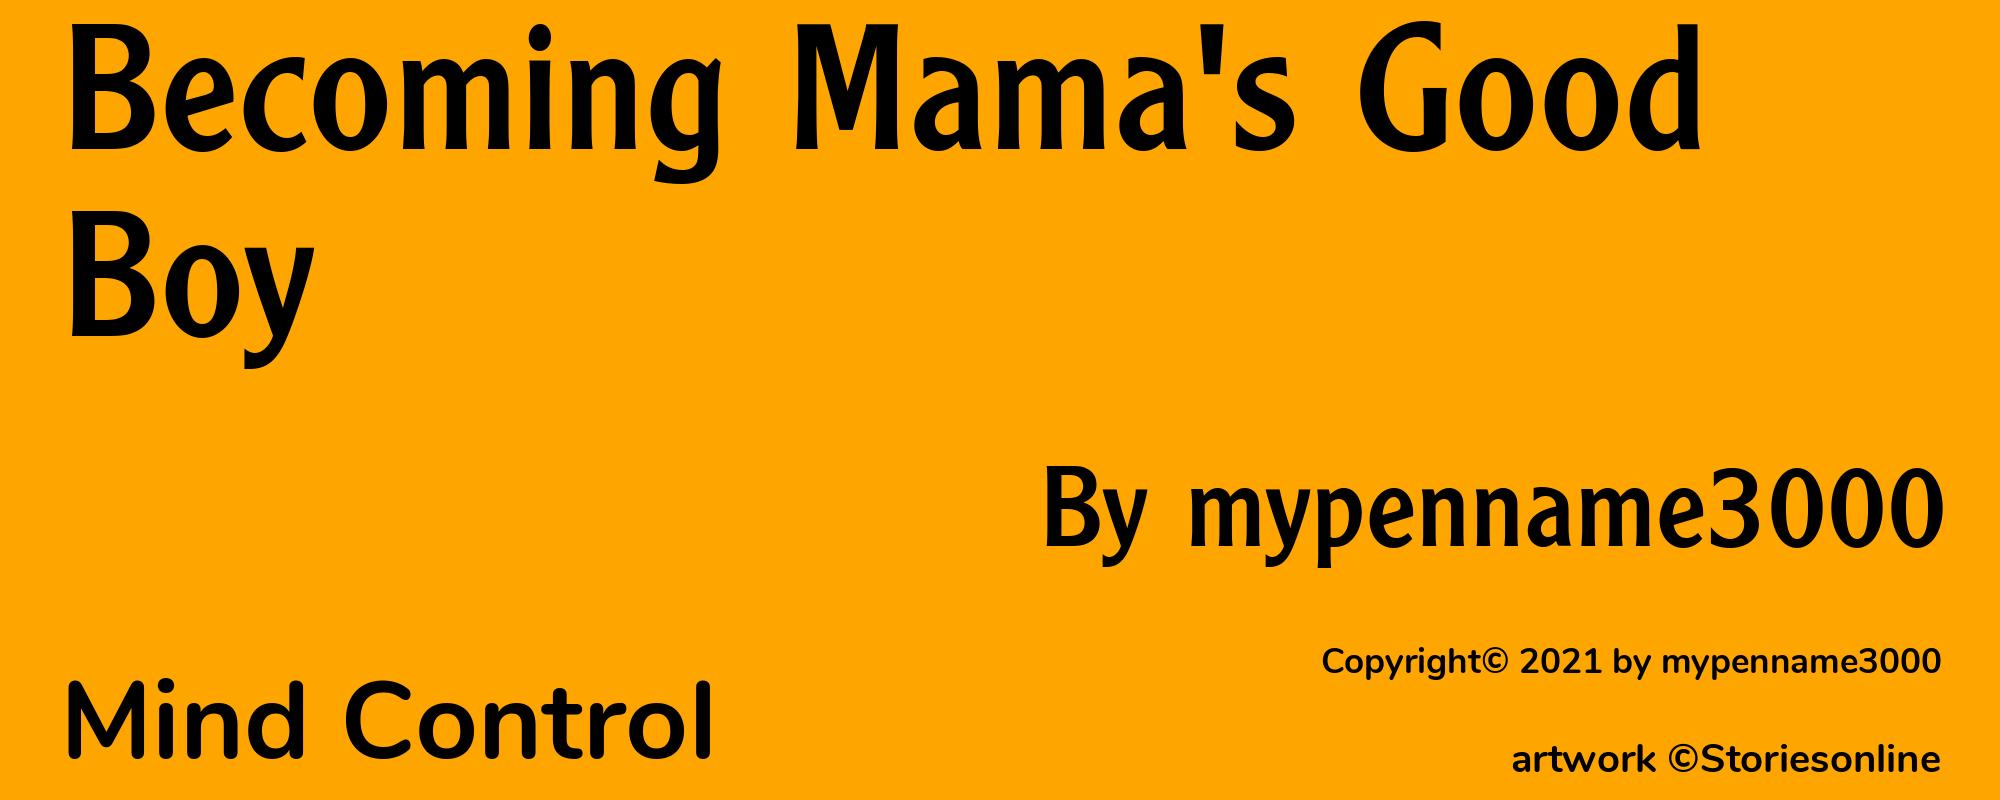 Becoming Mama's Good Boy - Cover